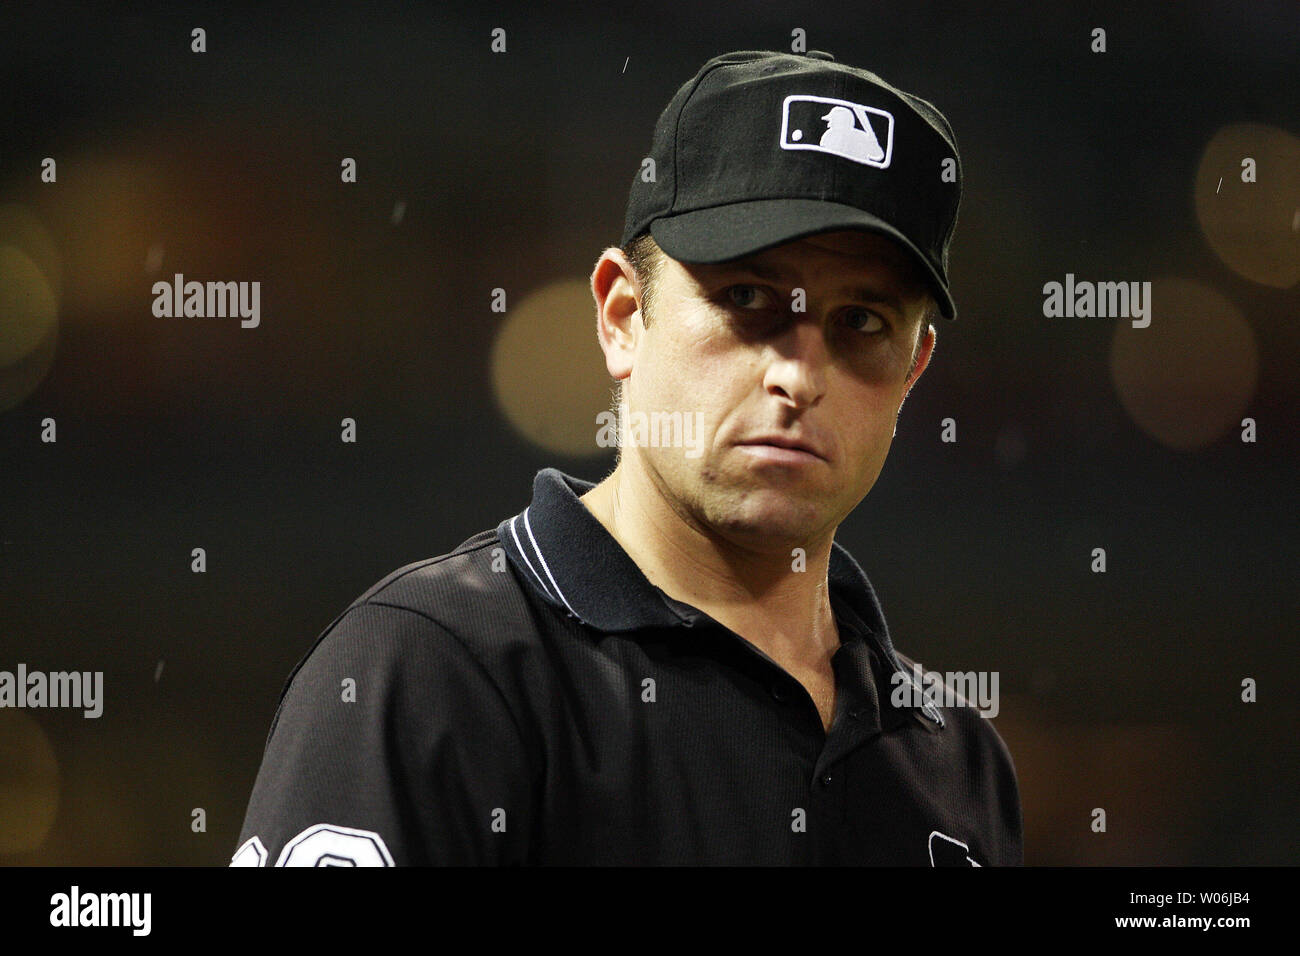 First base umpire Chris Guccione looks to the crowd in the ninth inning of a game between the Kansas City Royals and the St. Louis Cardinals at Busch Stadium in St. Louis on May 22, 2009. (UPI Photo/Bill Greenblatt) Stock Photo